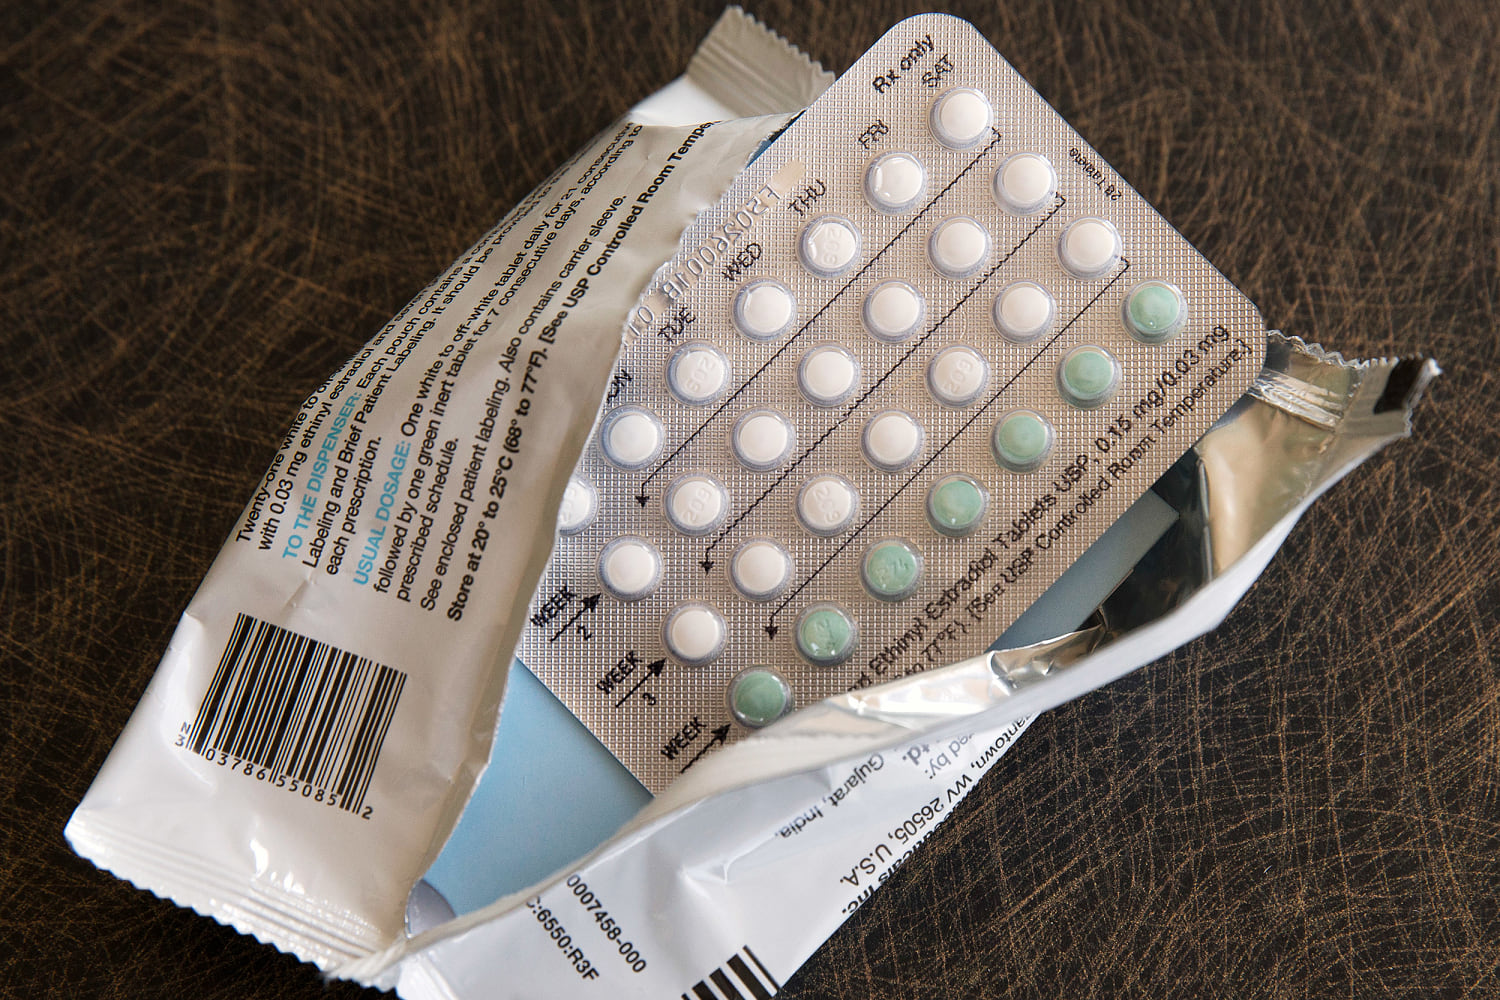 Trump leaves the door open to new restrictions on contraception